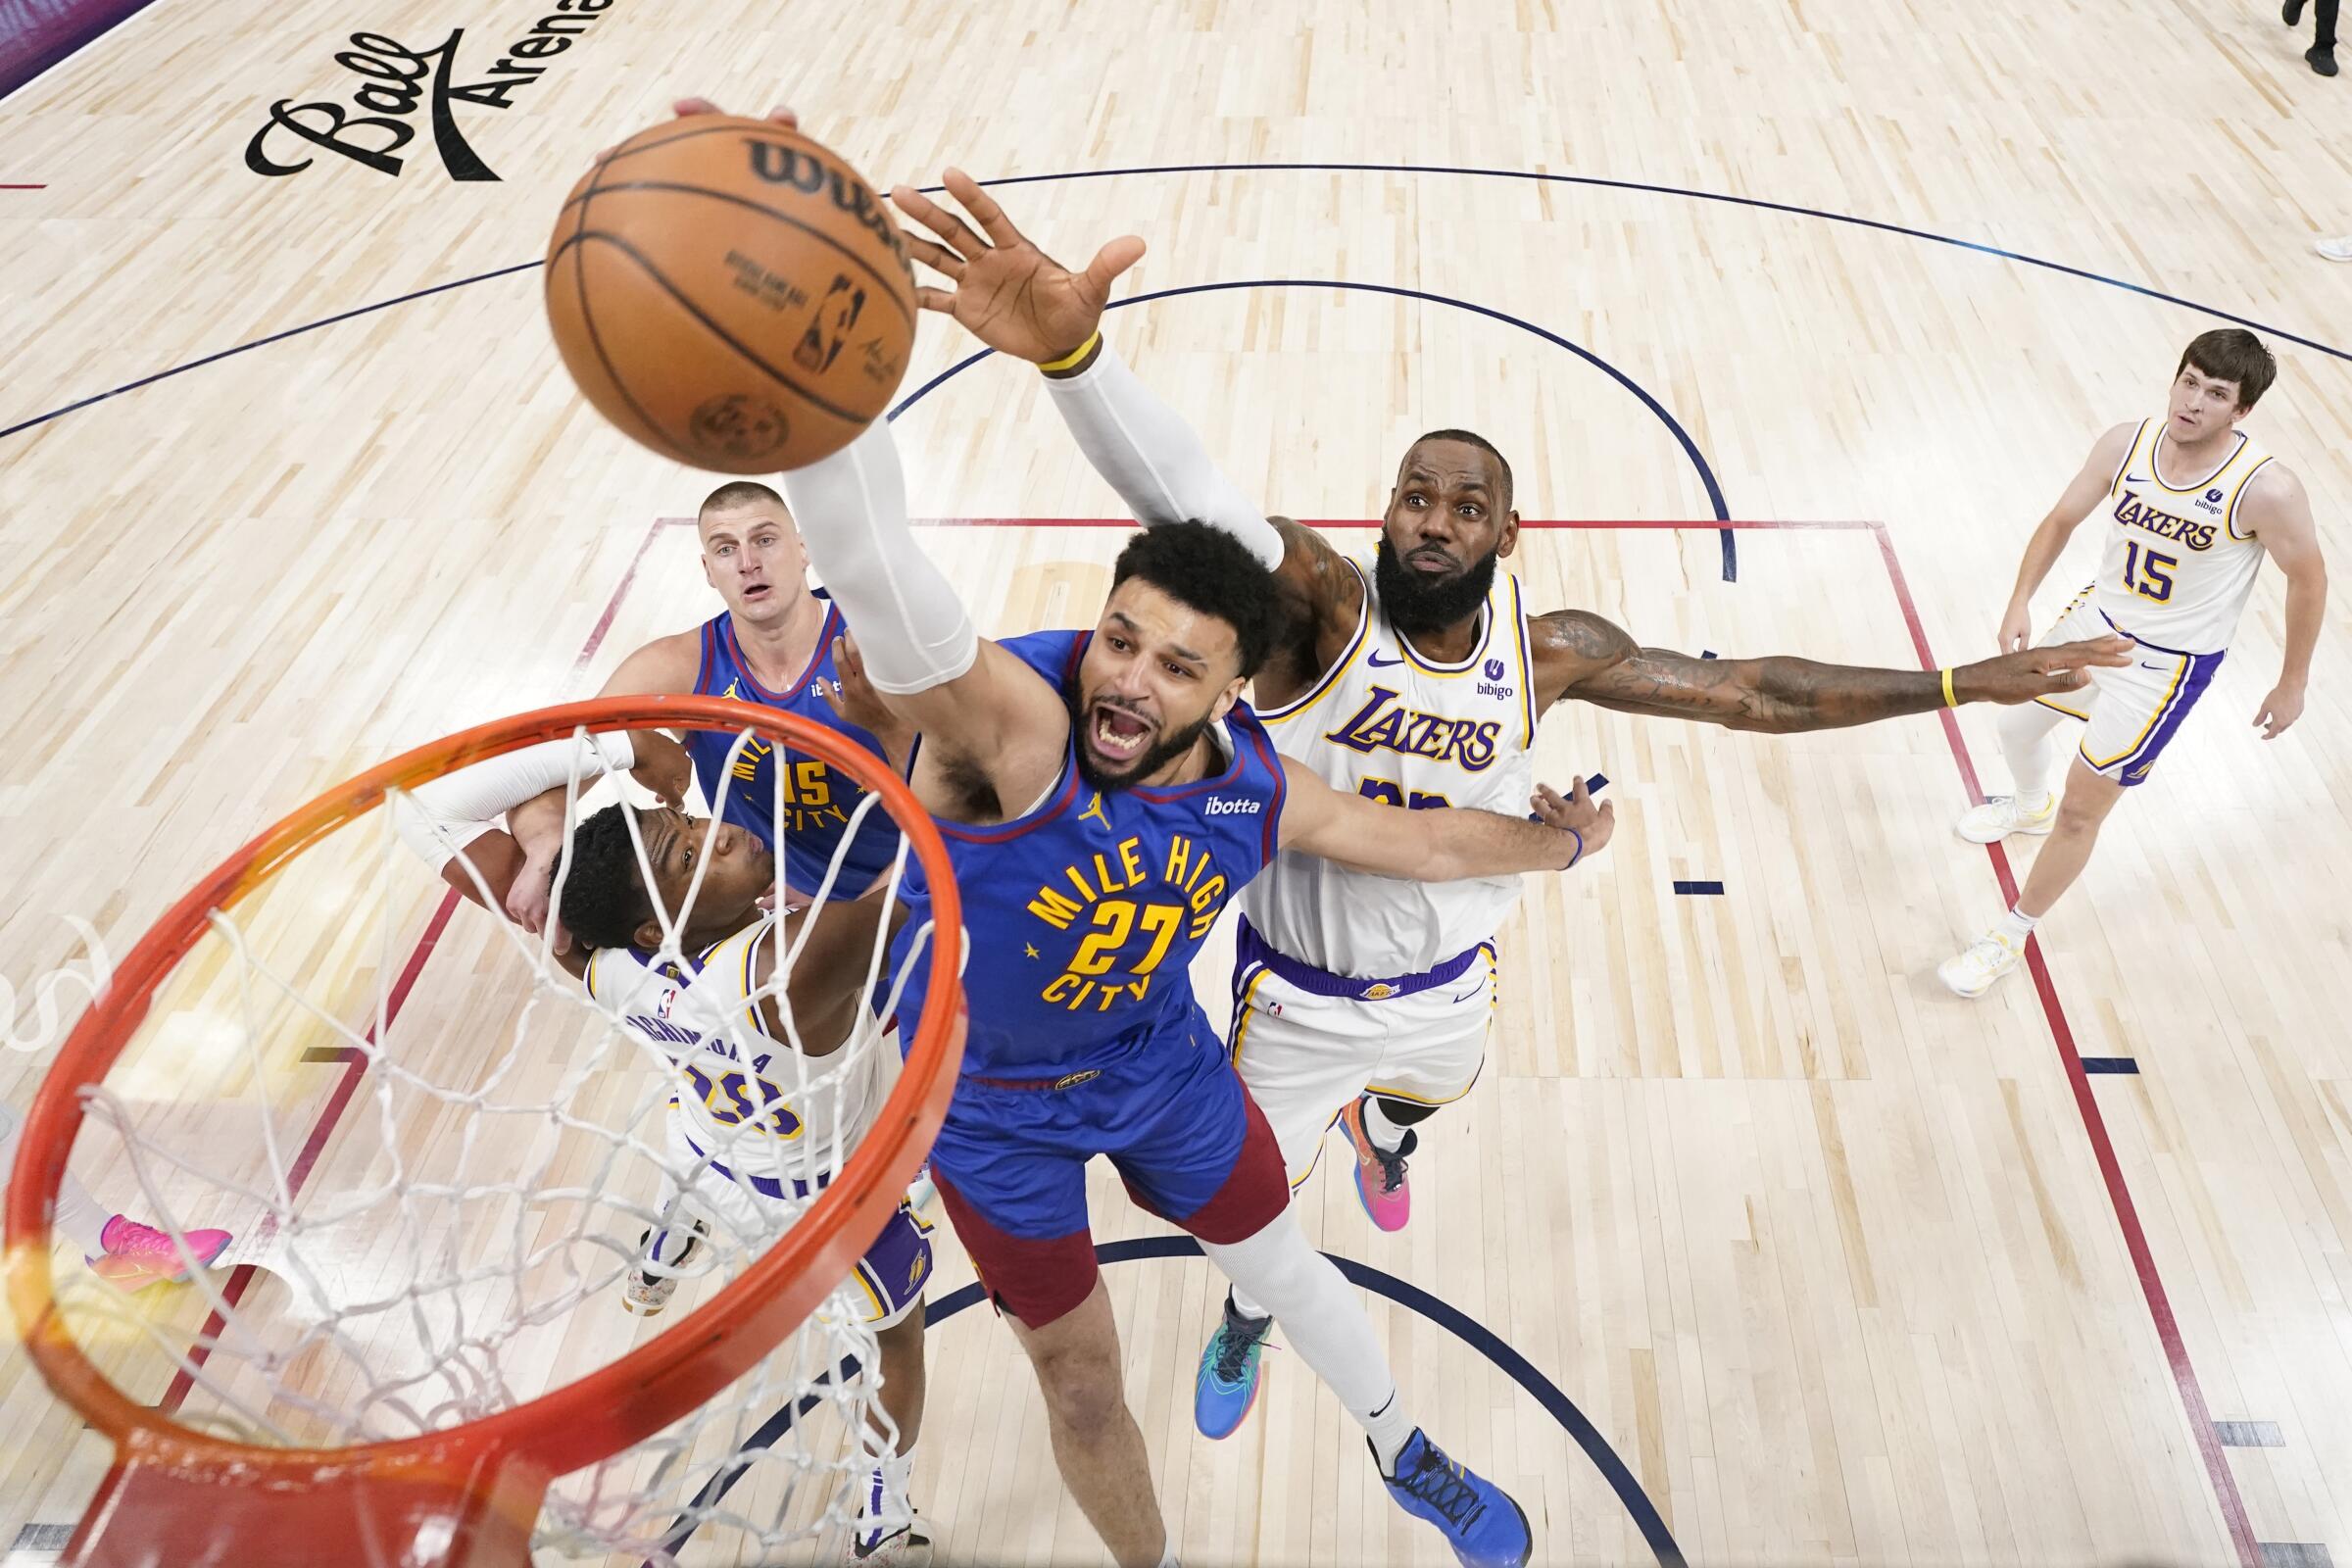 Nuggets guard Jamal Murray elevates for a layup ahead of Lakers forward LeBron James during Game 1 on Saturday.